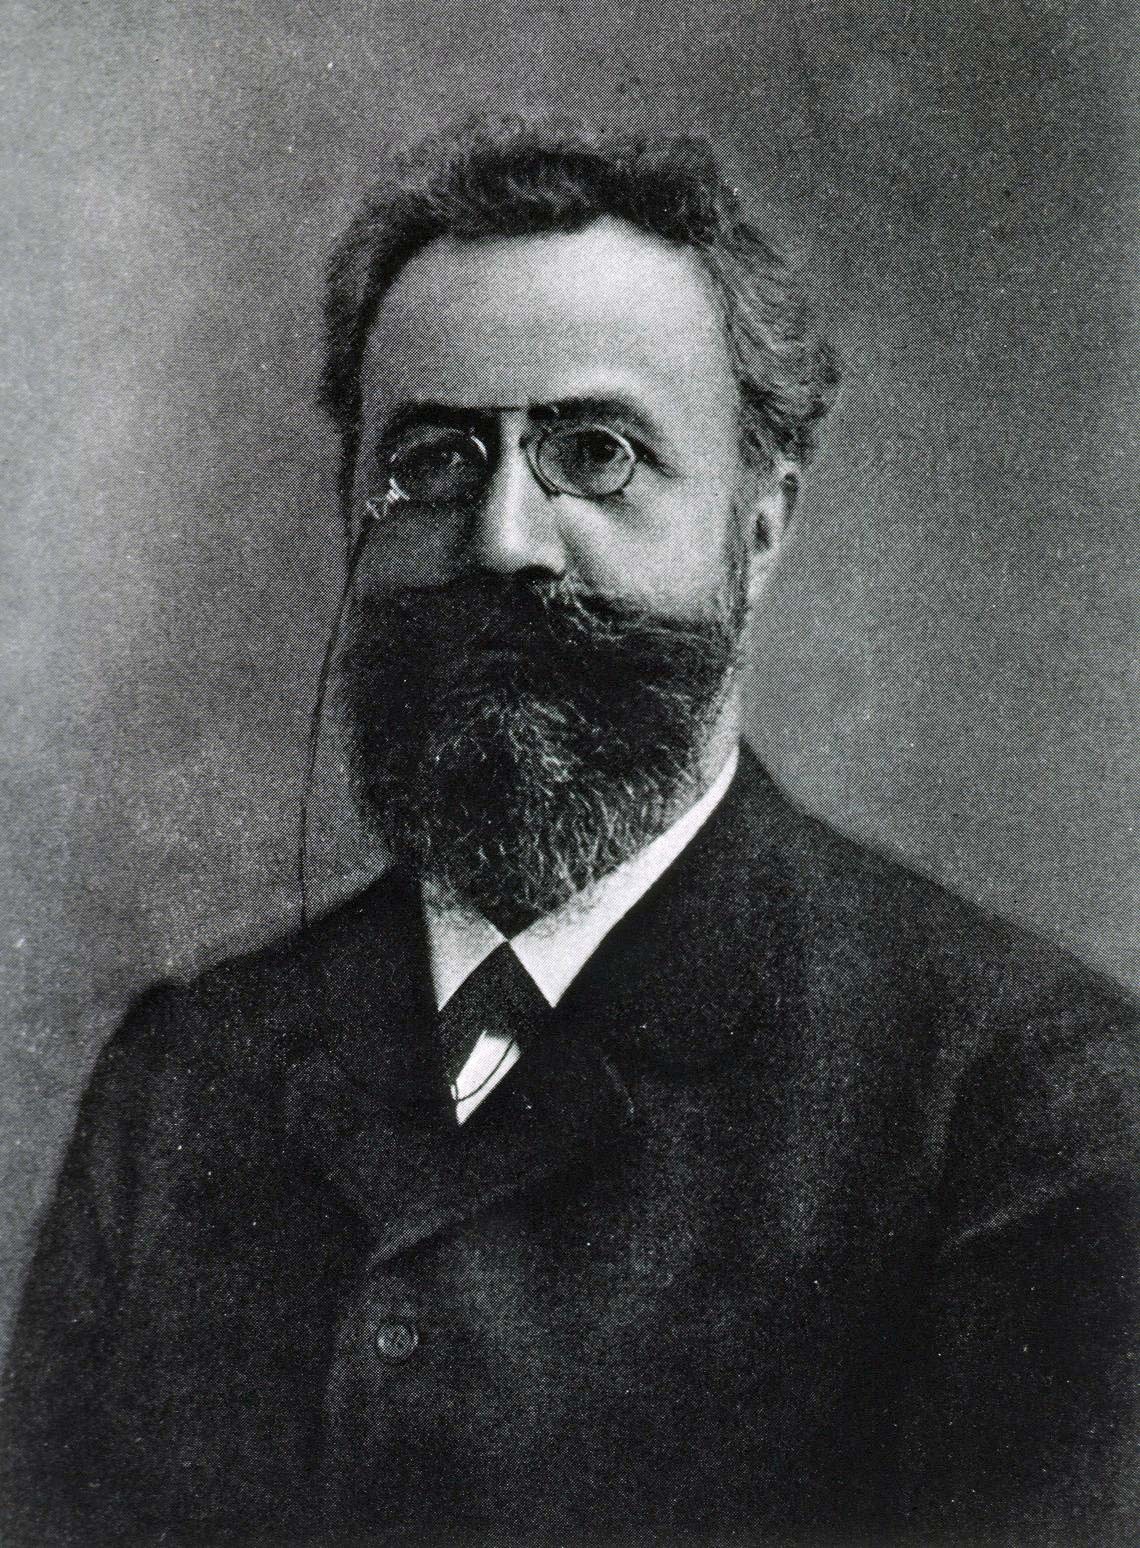 <p>Hermann Ebbinghaus details his experiments learning nonsense syllables in his book Memory</p>